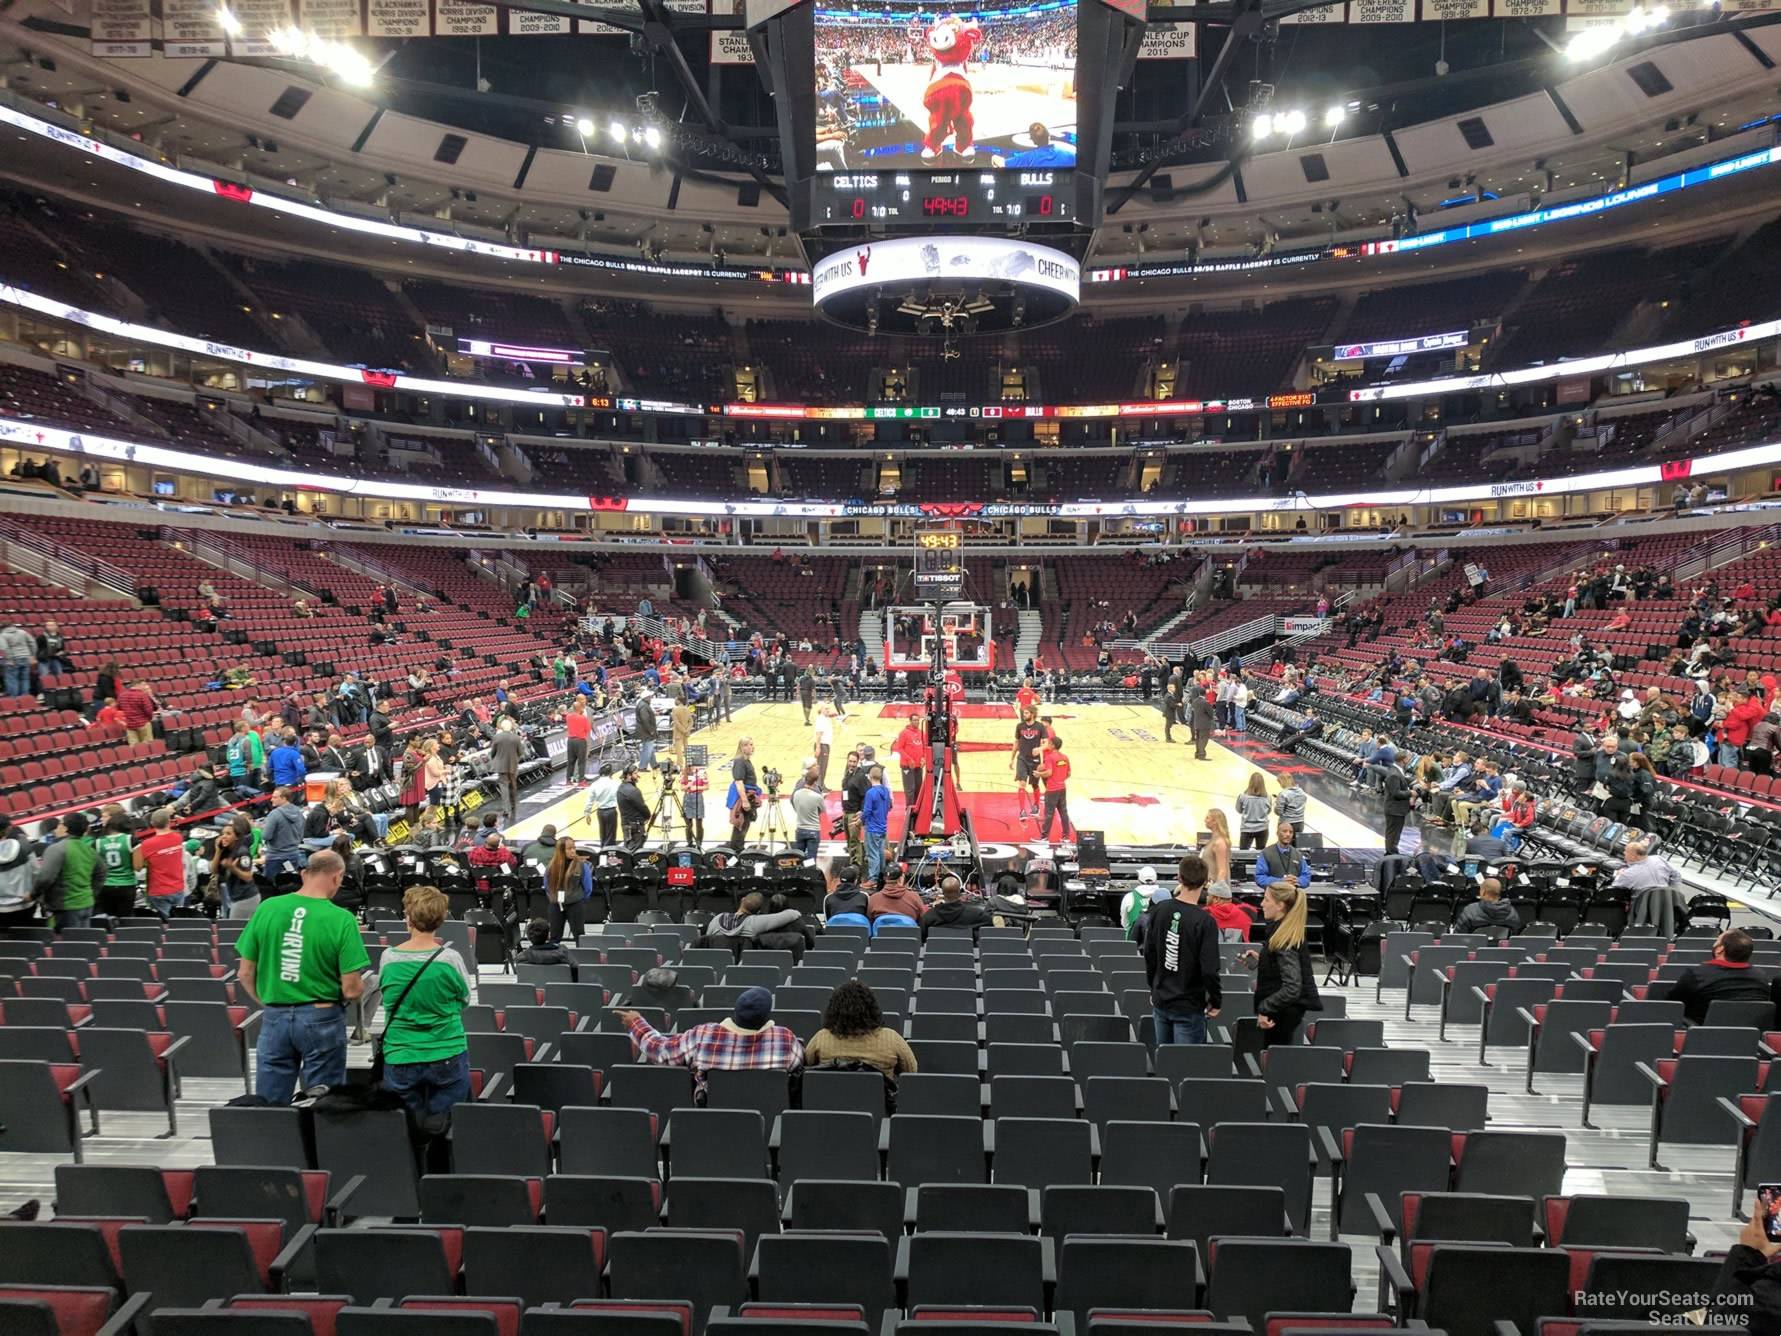 Behind the Basket seats at the United Center